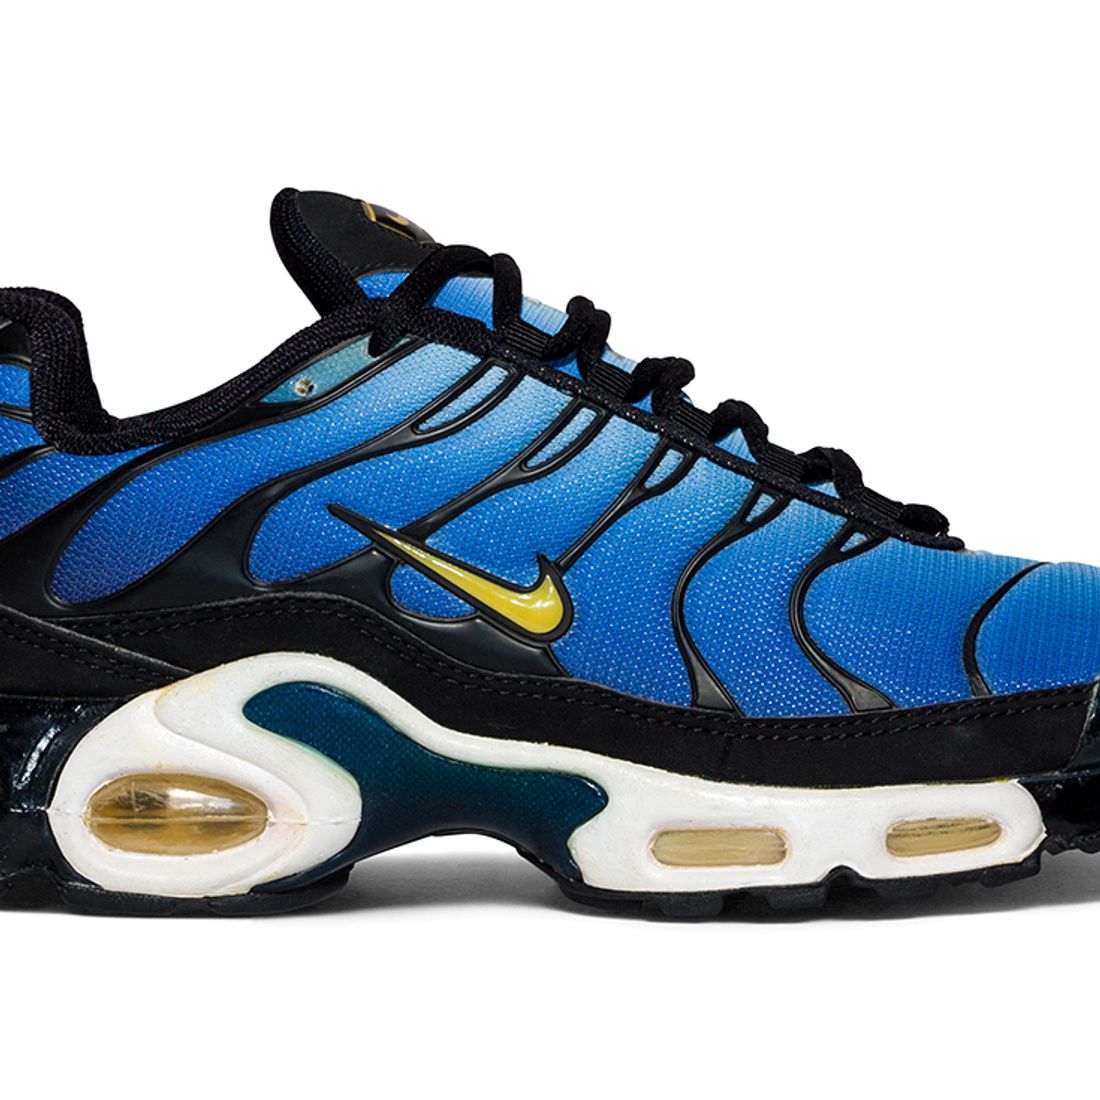 Rare Nike Air Max Plus 3 Tuned Leather Shoes Sneaker Blue Japan